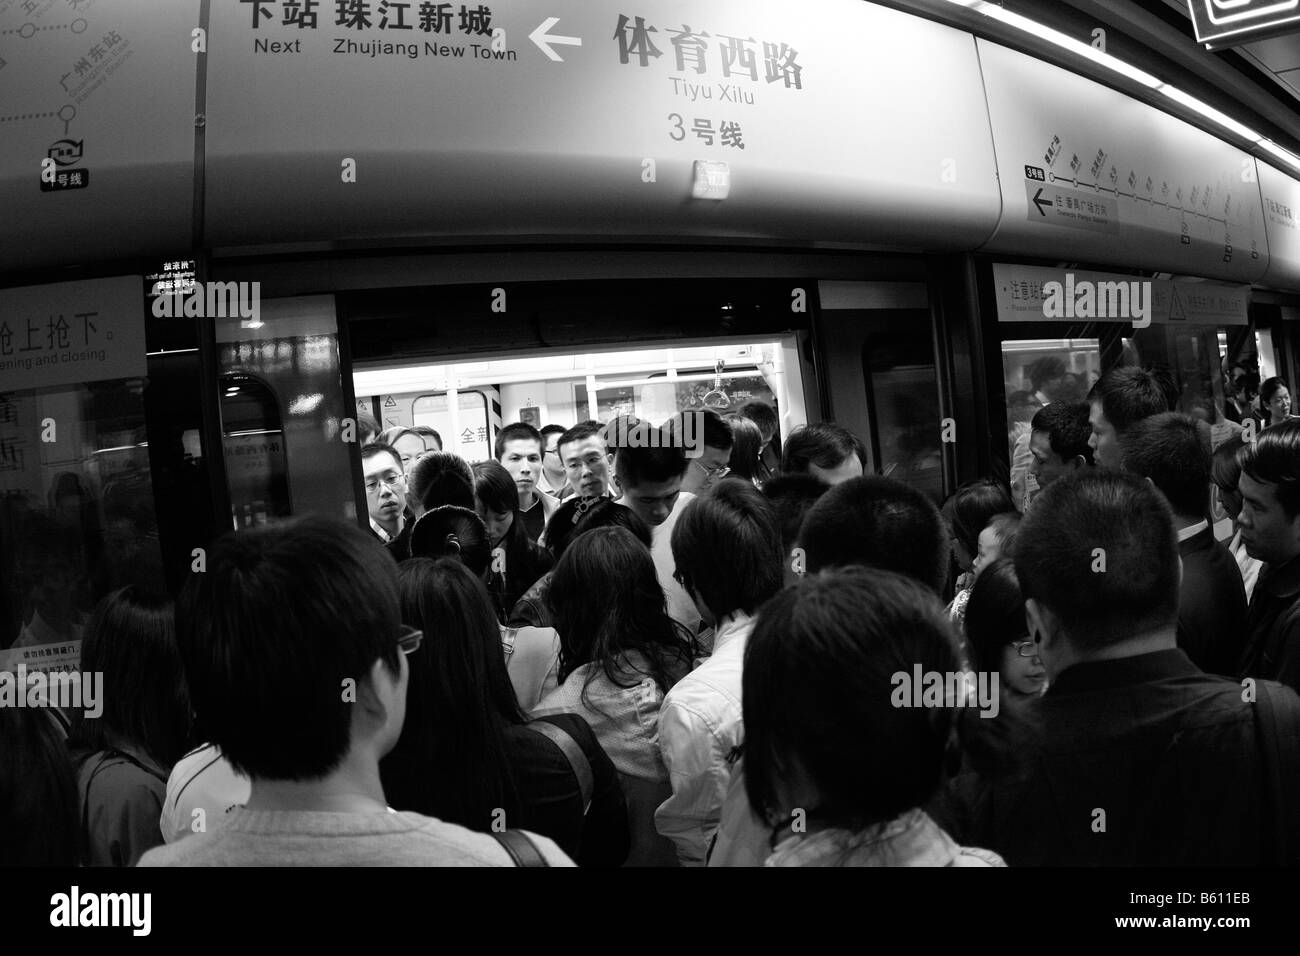 Chaos, boarding crowded subway car, China. Overpopulation, mas confusion. Mob. In China people rarely que up. Over population ha Stock Photo